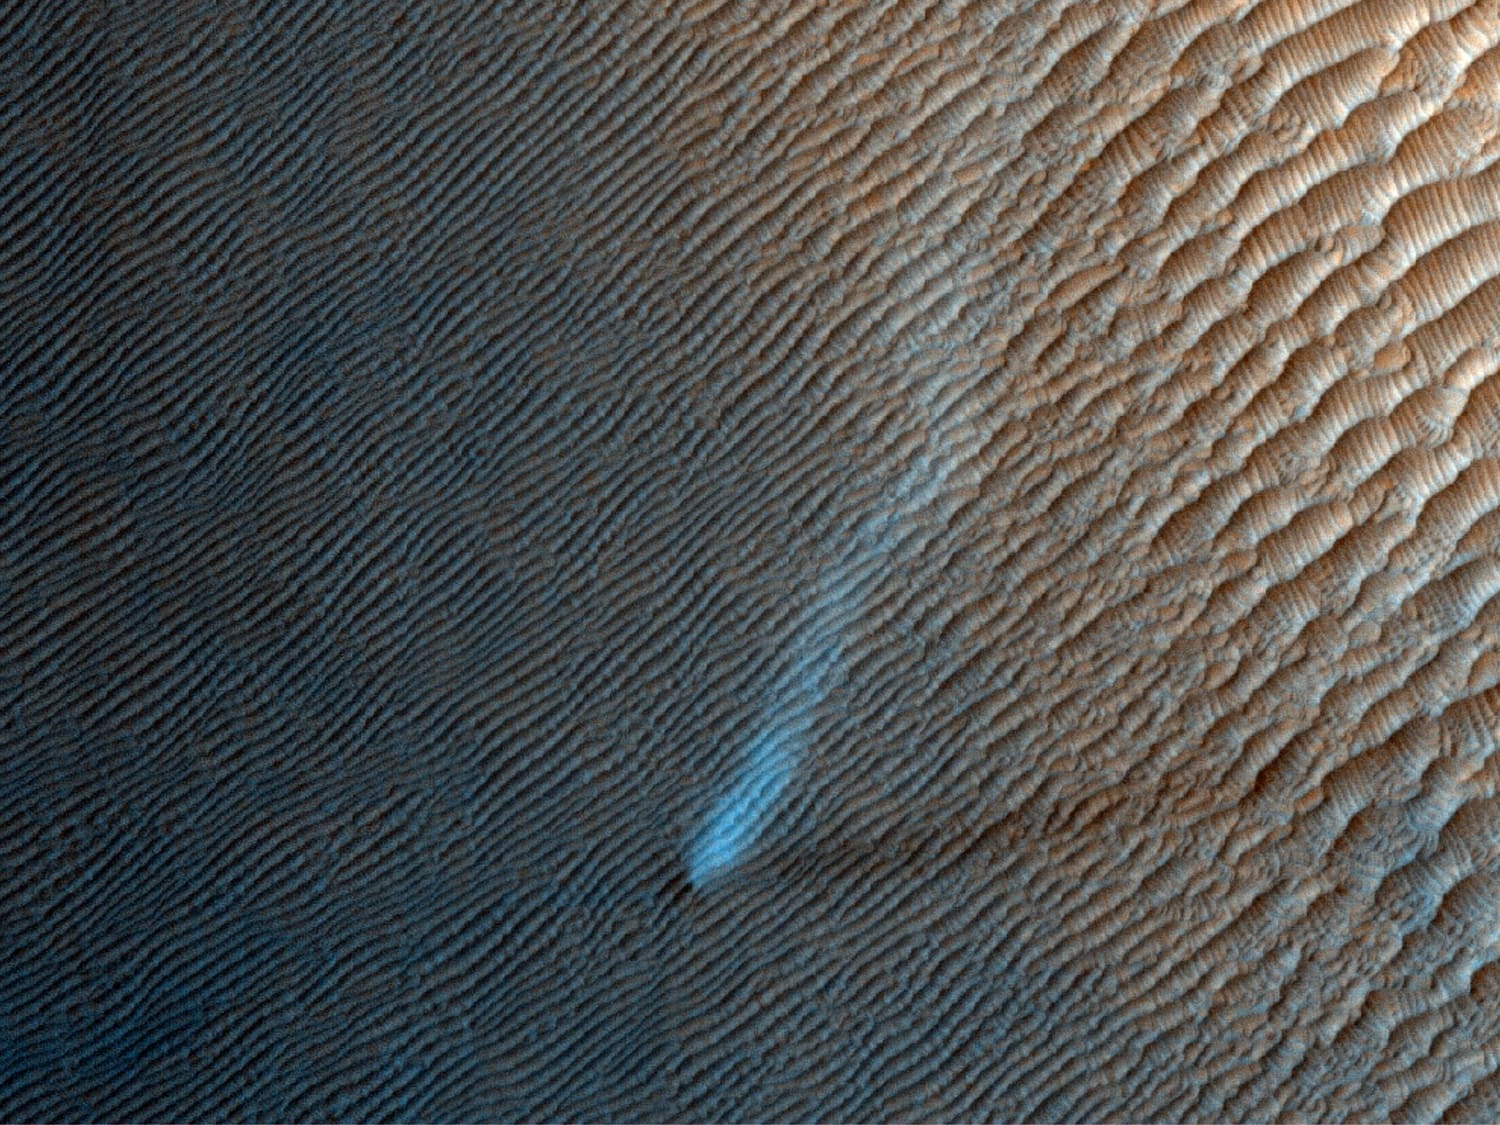 HiRISE image of a whirling Dust Devil